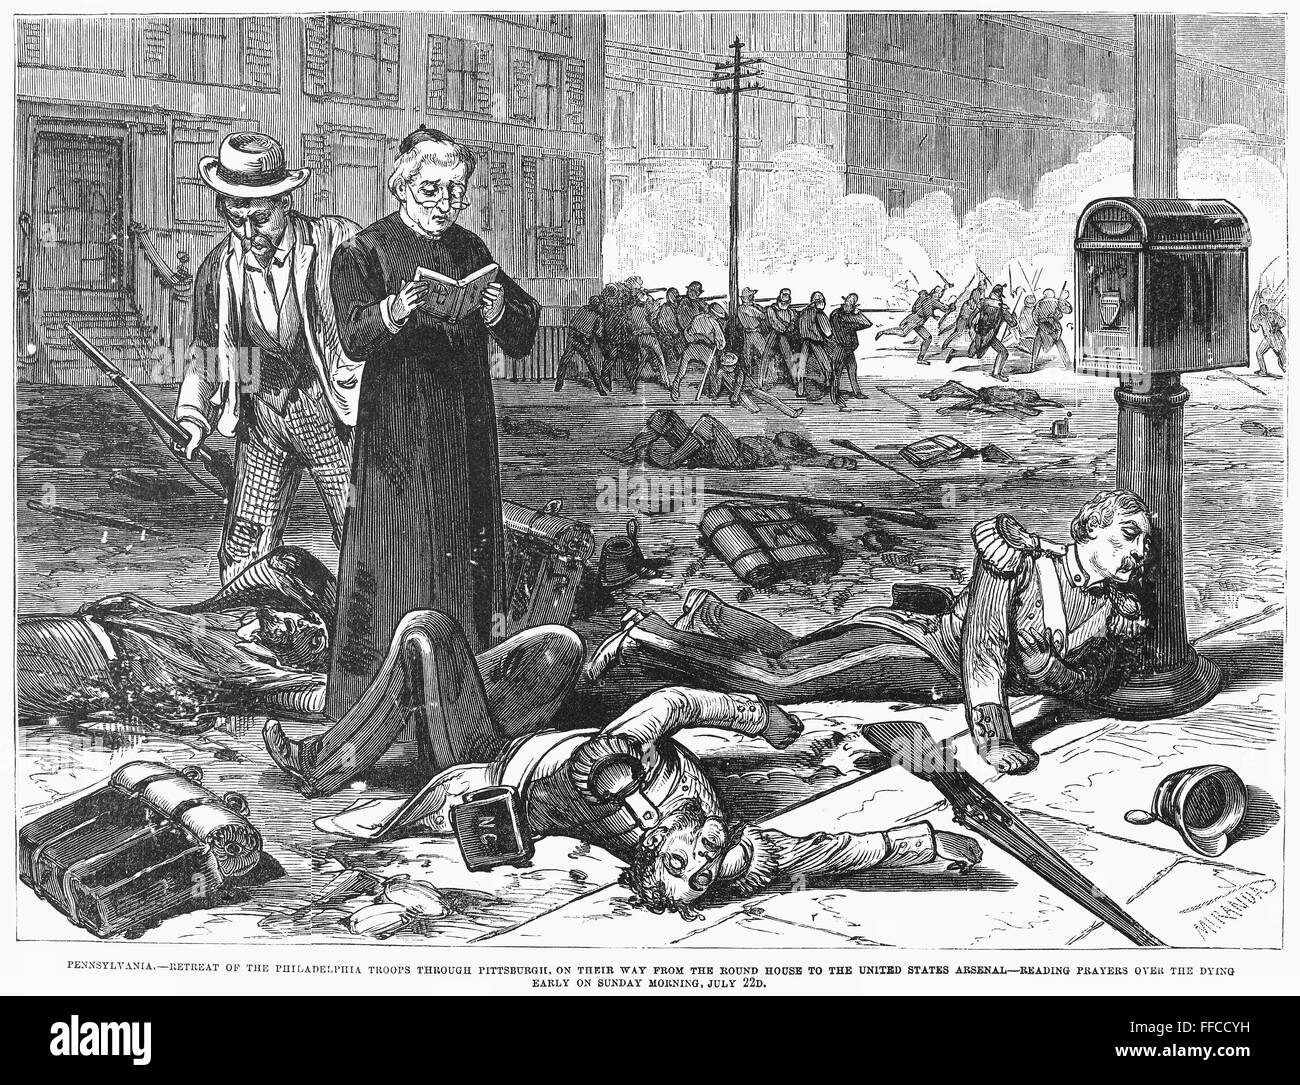 GREAT RAILROAD STRIKE, 1877. /nA priest reads prayers over dying militiamen as the troops retreat through Pittsburgh, Pennsylvania, during the Great Railroad Strike, 22 July 1877. Contemporary American wood engraving. Stock Photo